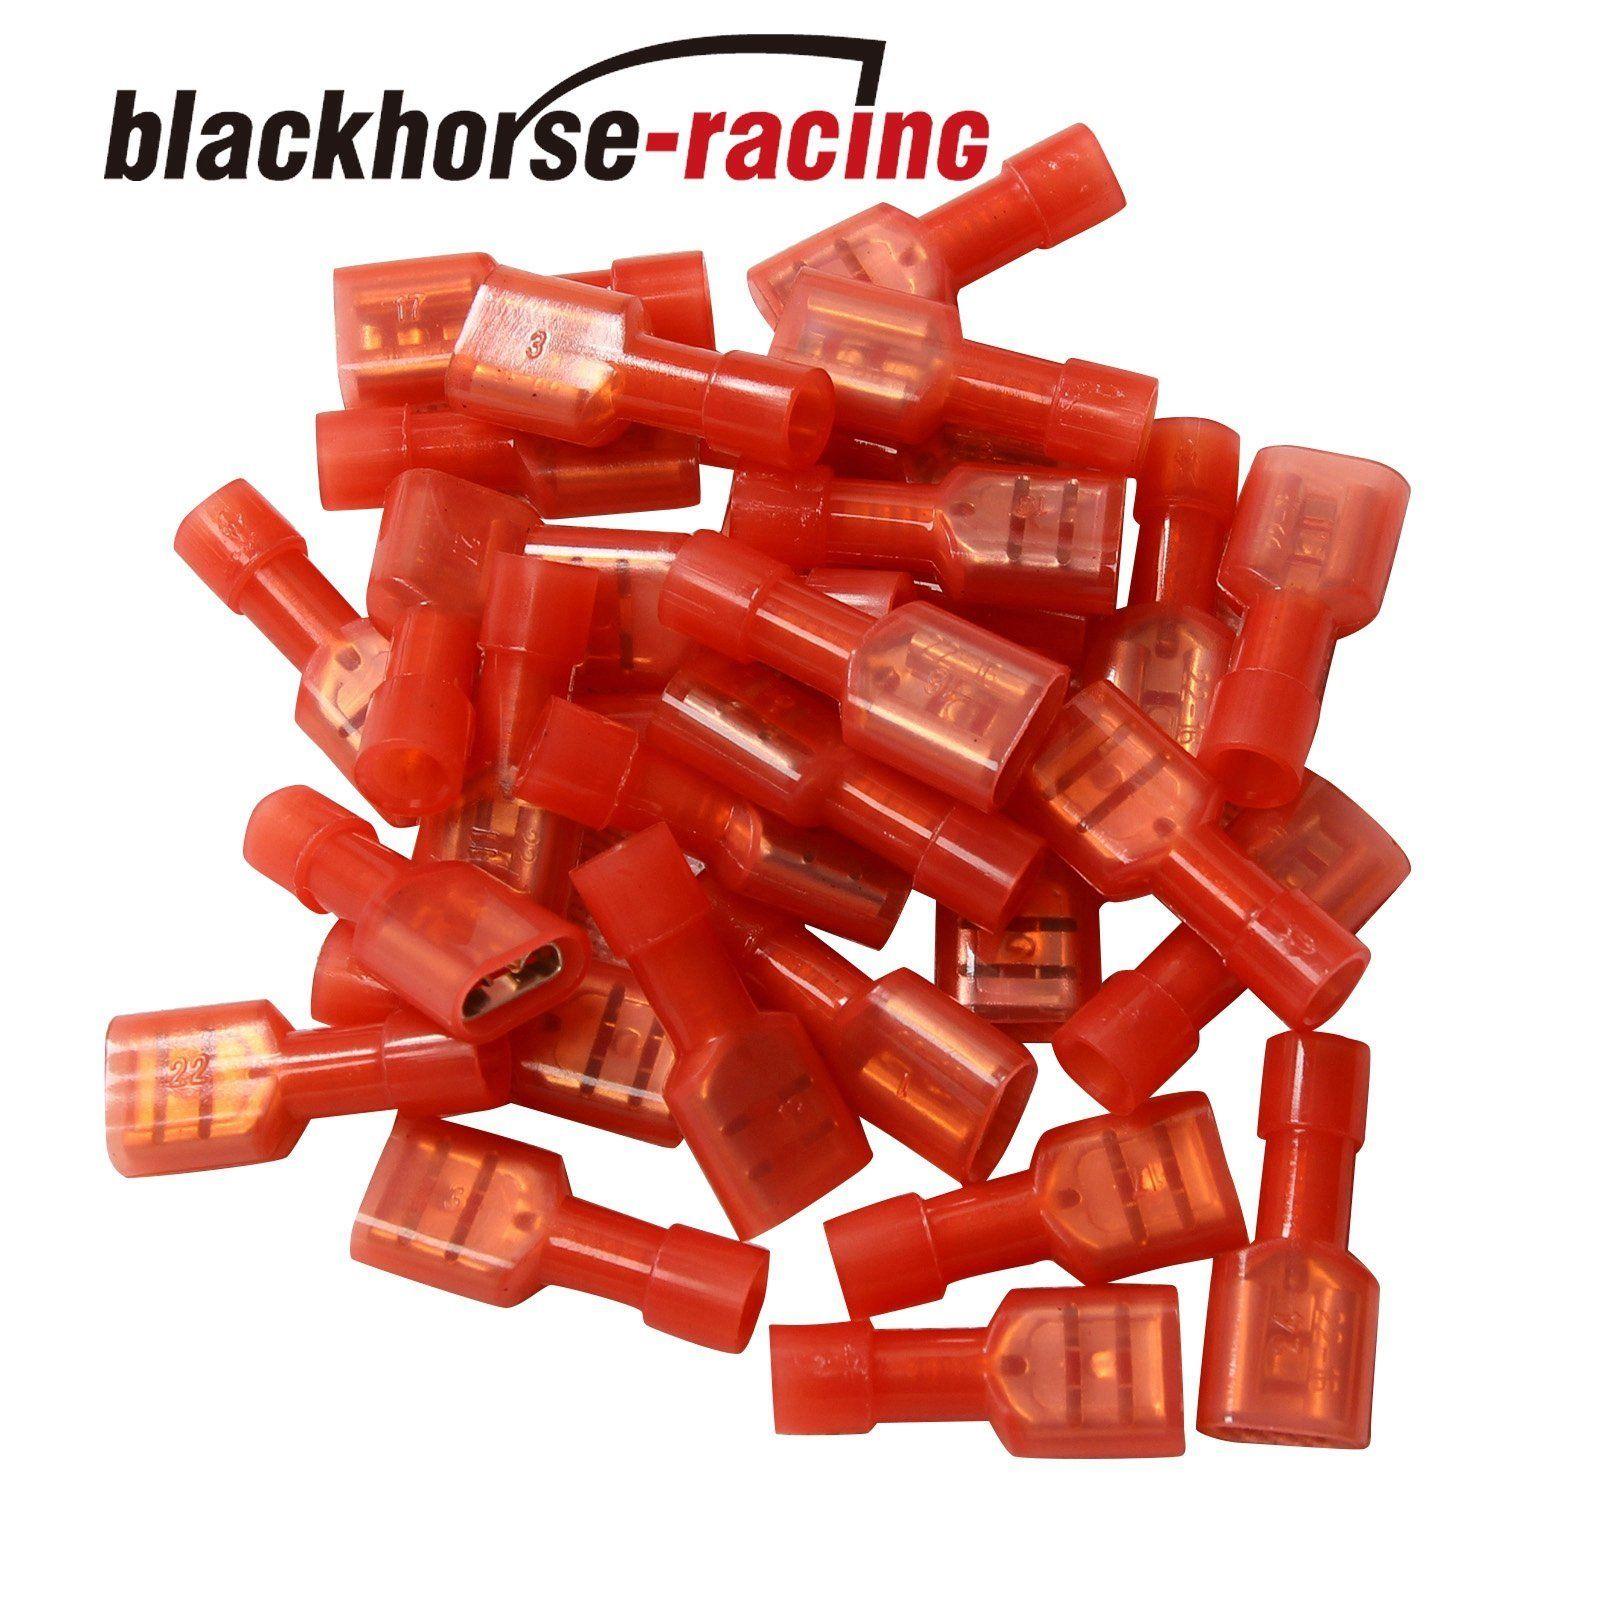 100Pc Fully Insulated Red Female Electrical Spade Crimp Connector Terminals 1/4'' - www.blackhorse-racing.com